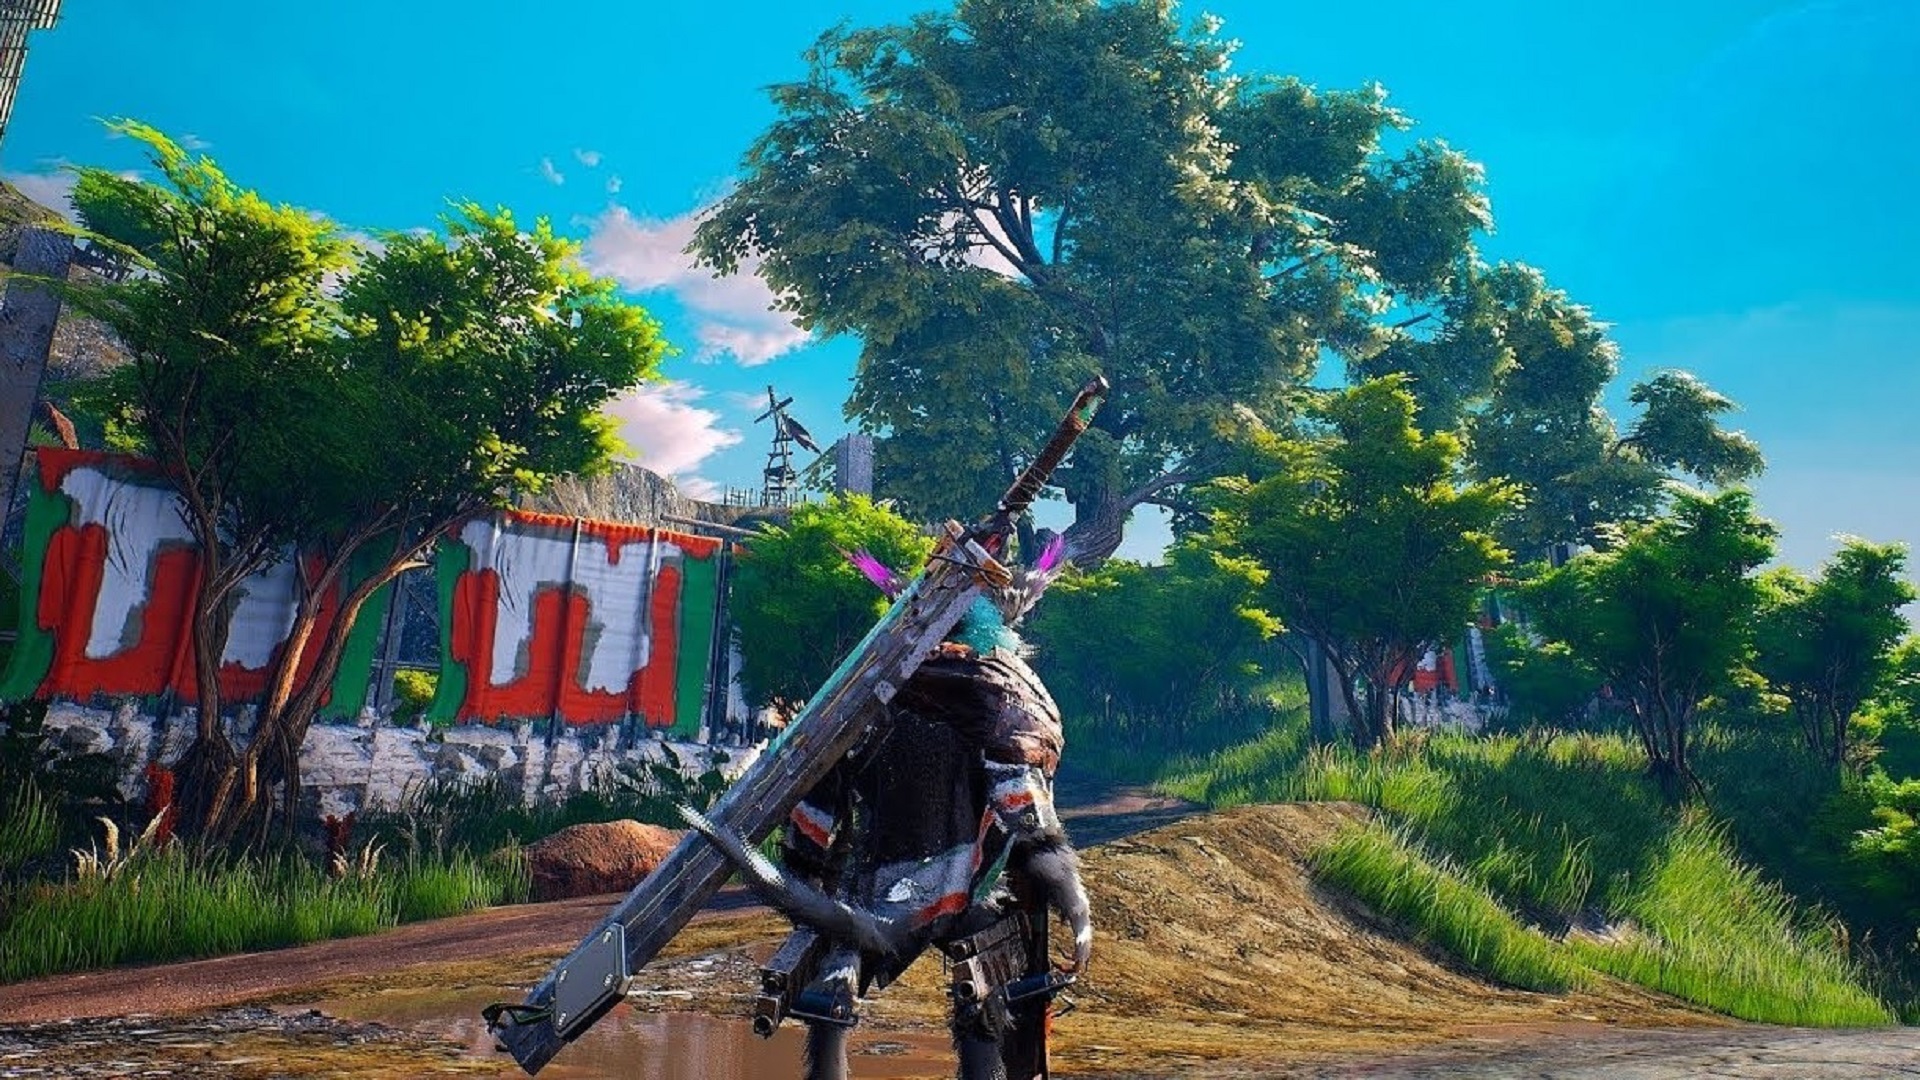 is biomutant on ps5